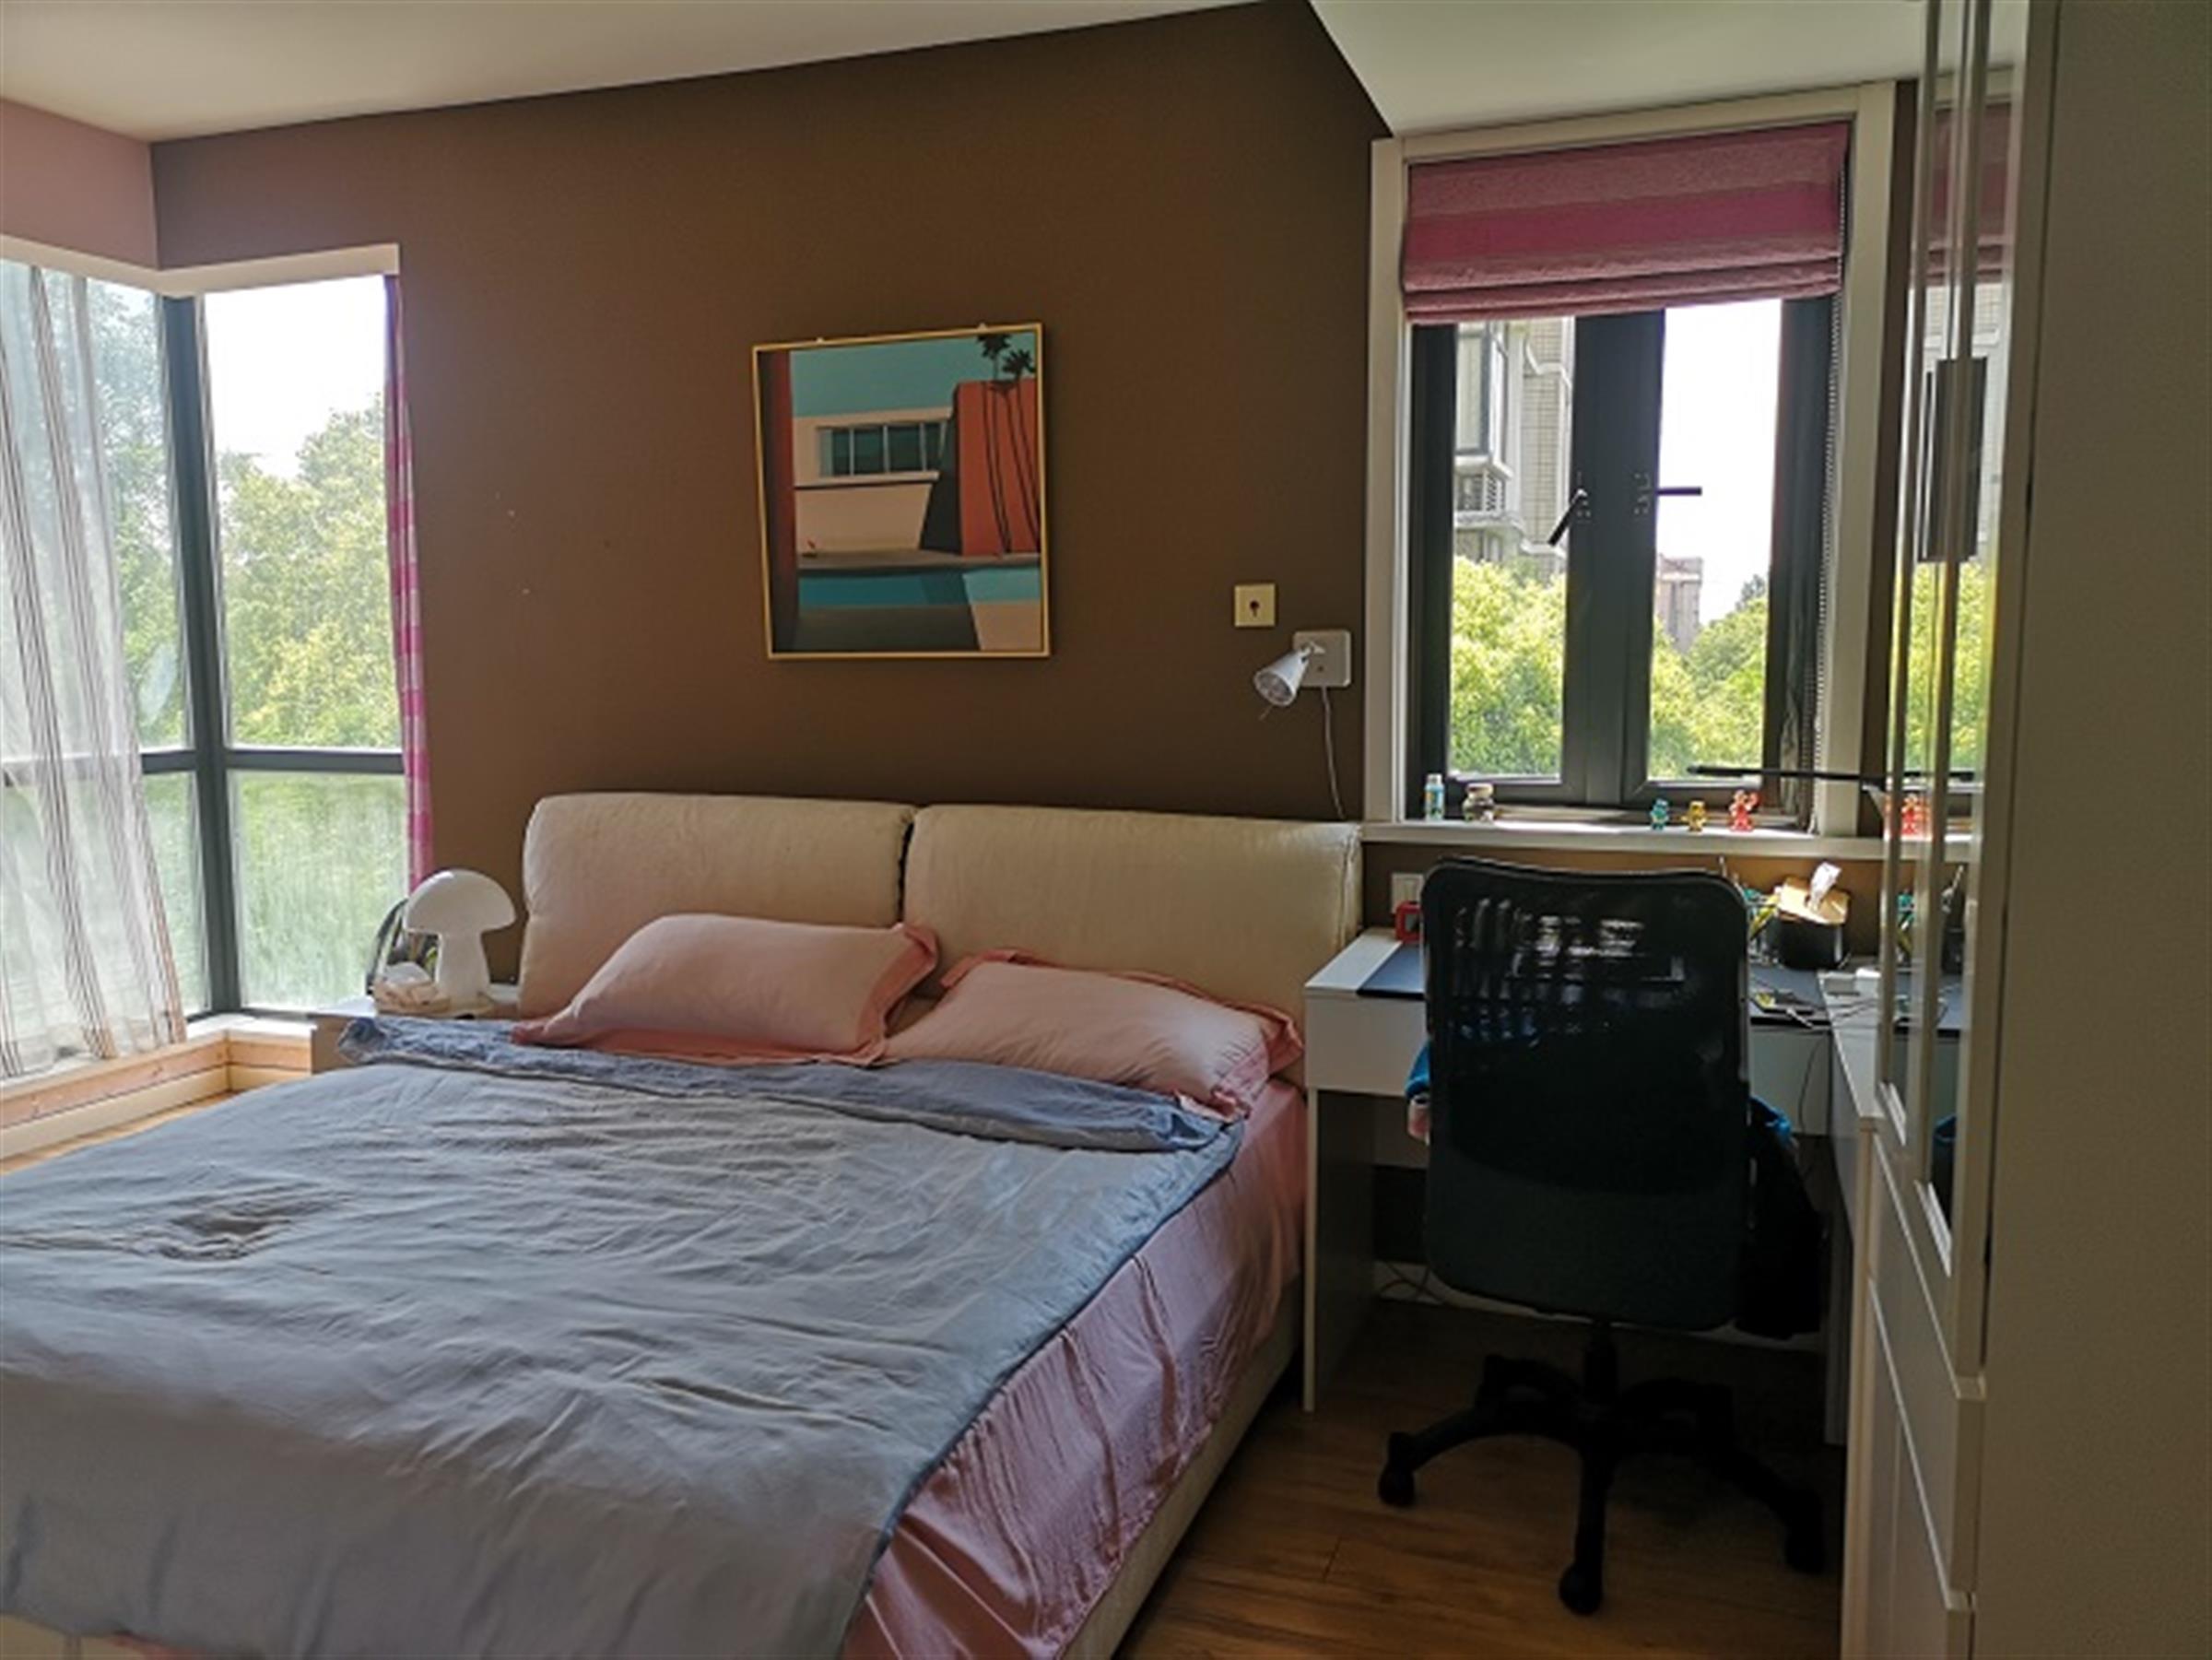 Bright Bedrooms Quiet Fresh Air among Treetops nr Shanghai Zoo w Spacious Bright Apt for Rent